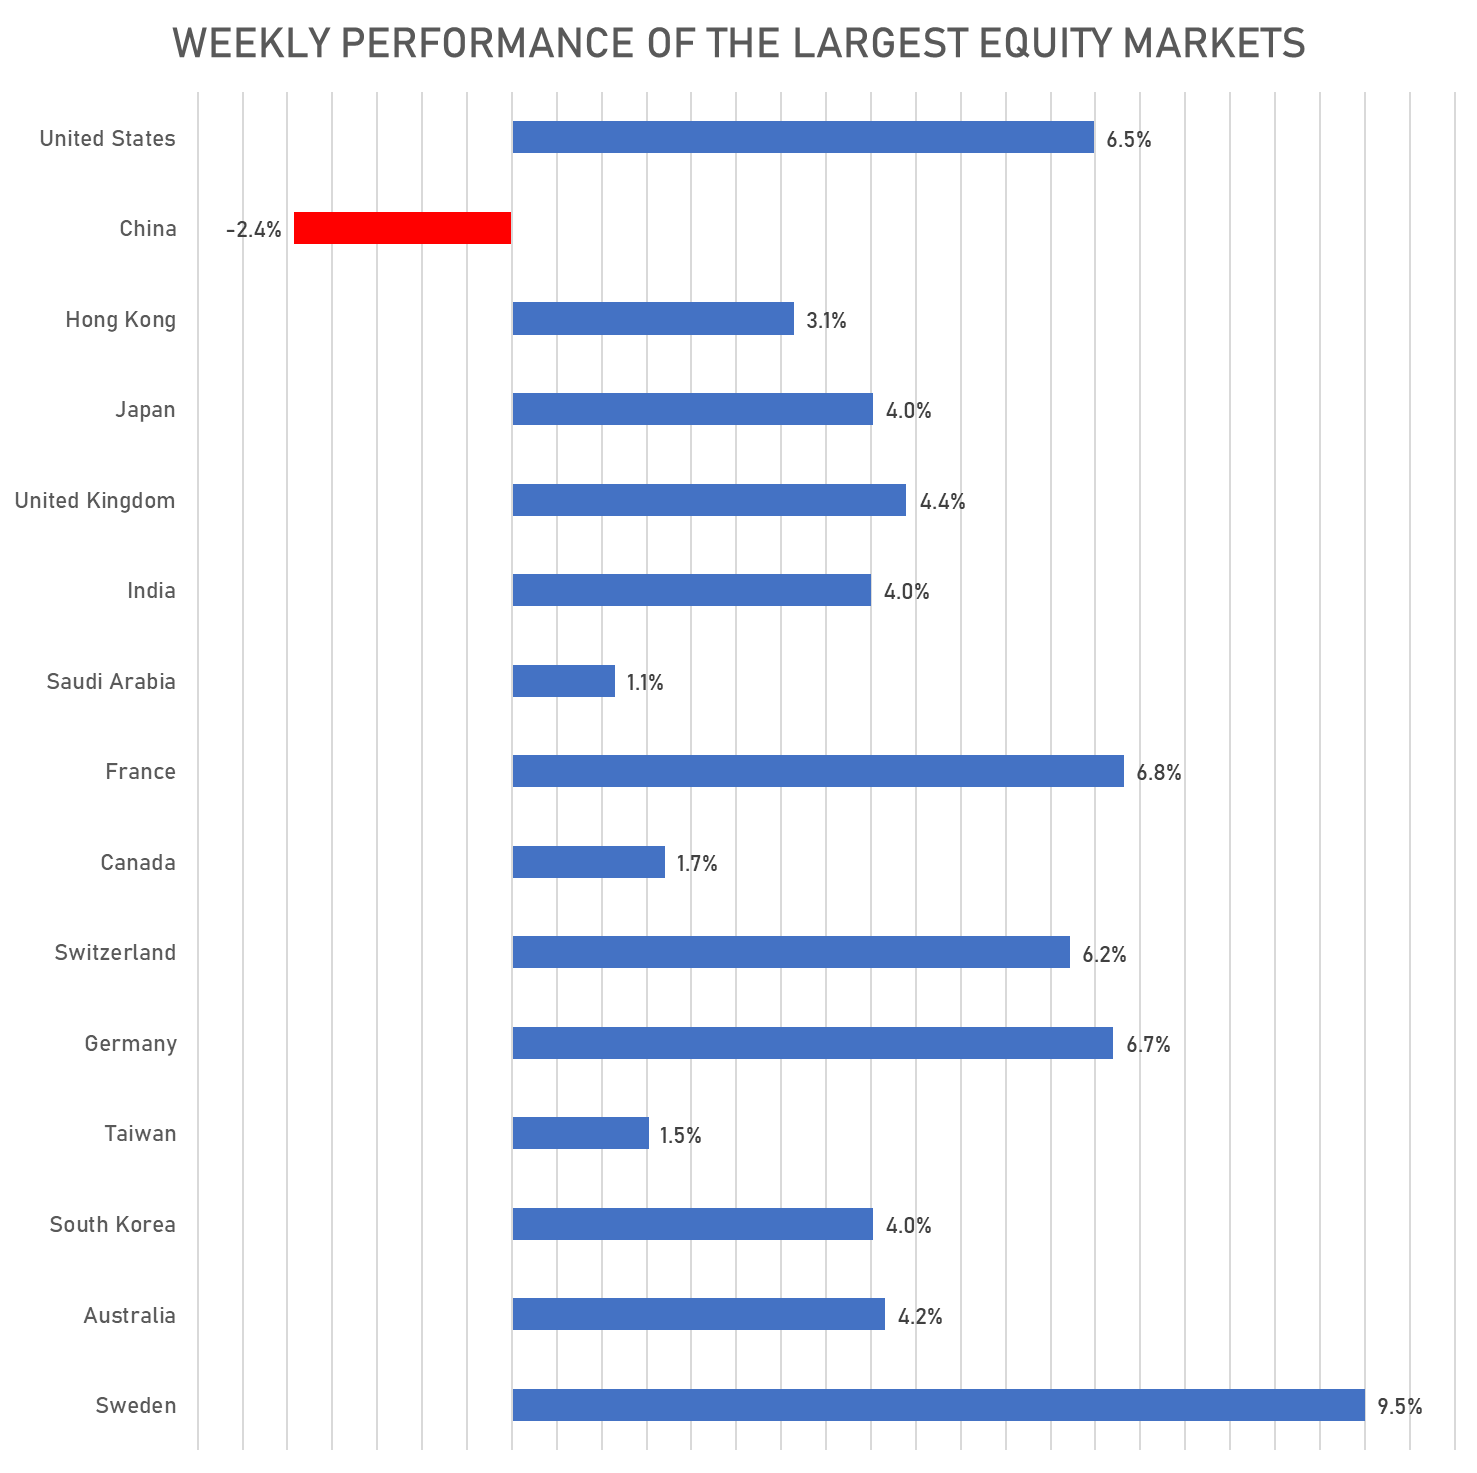 Weekly performance of the largest equity markets | Sources: phipost.com, FactSet data